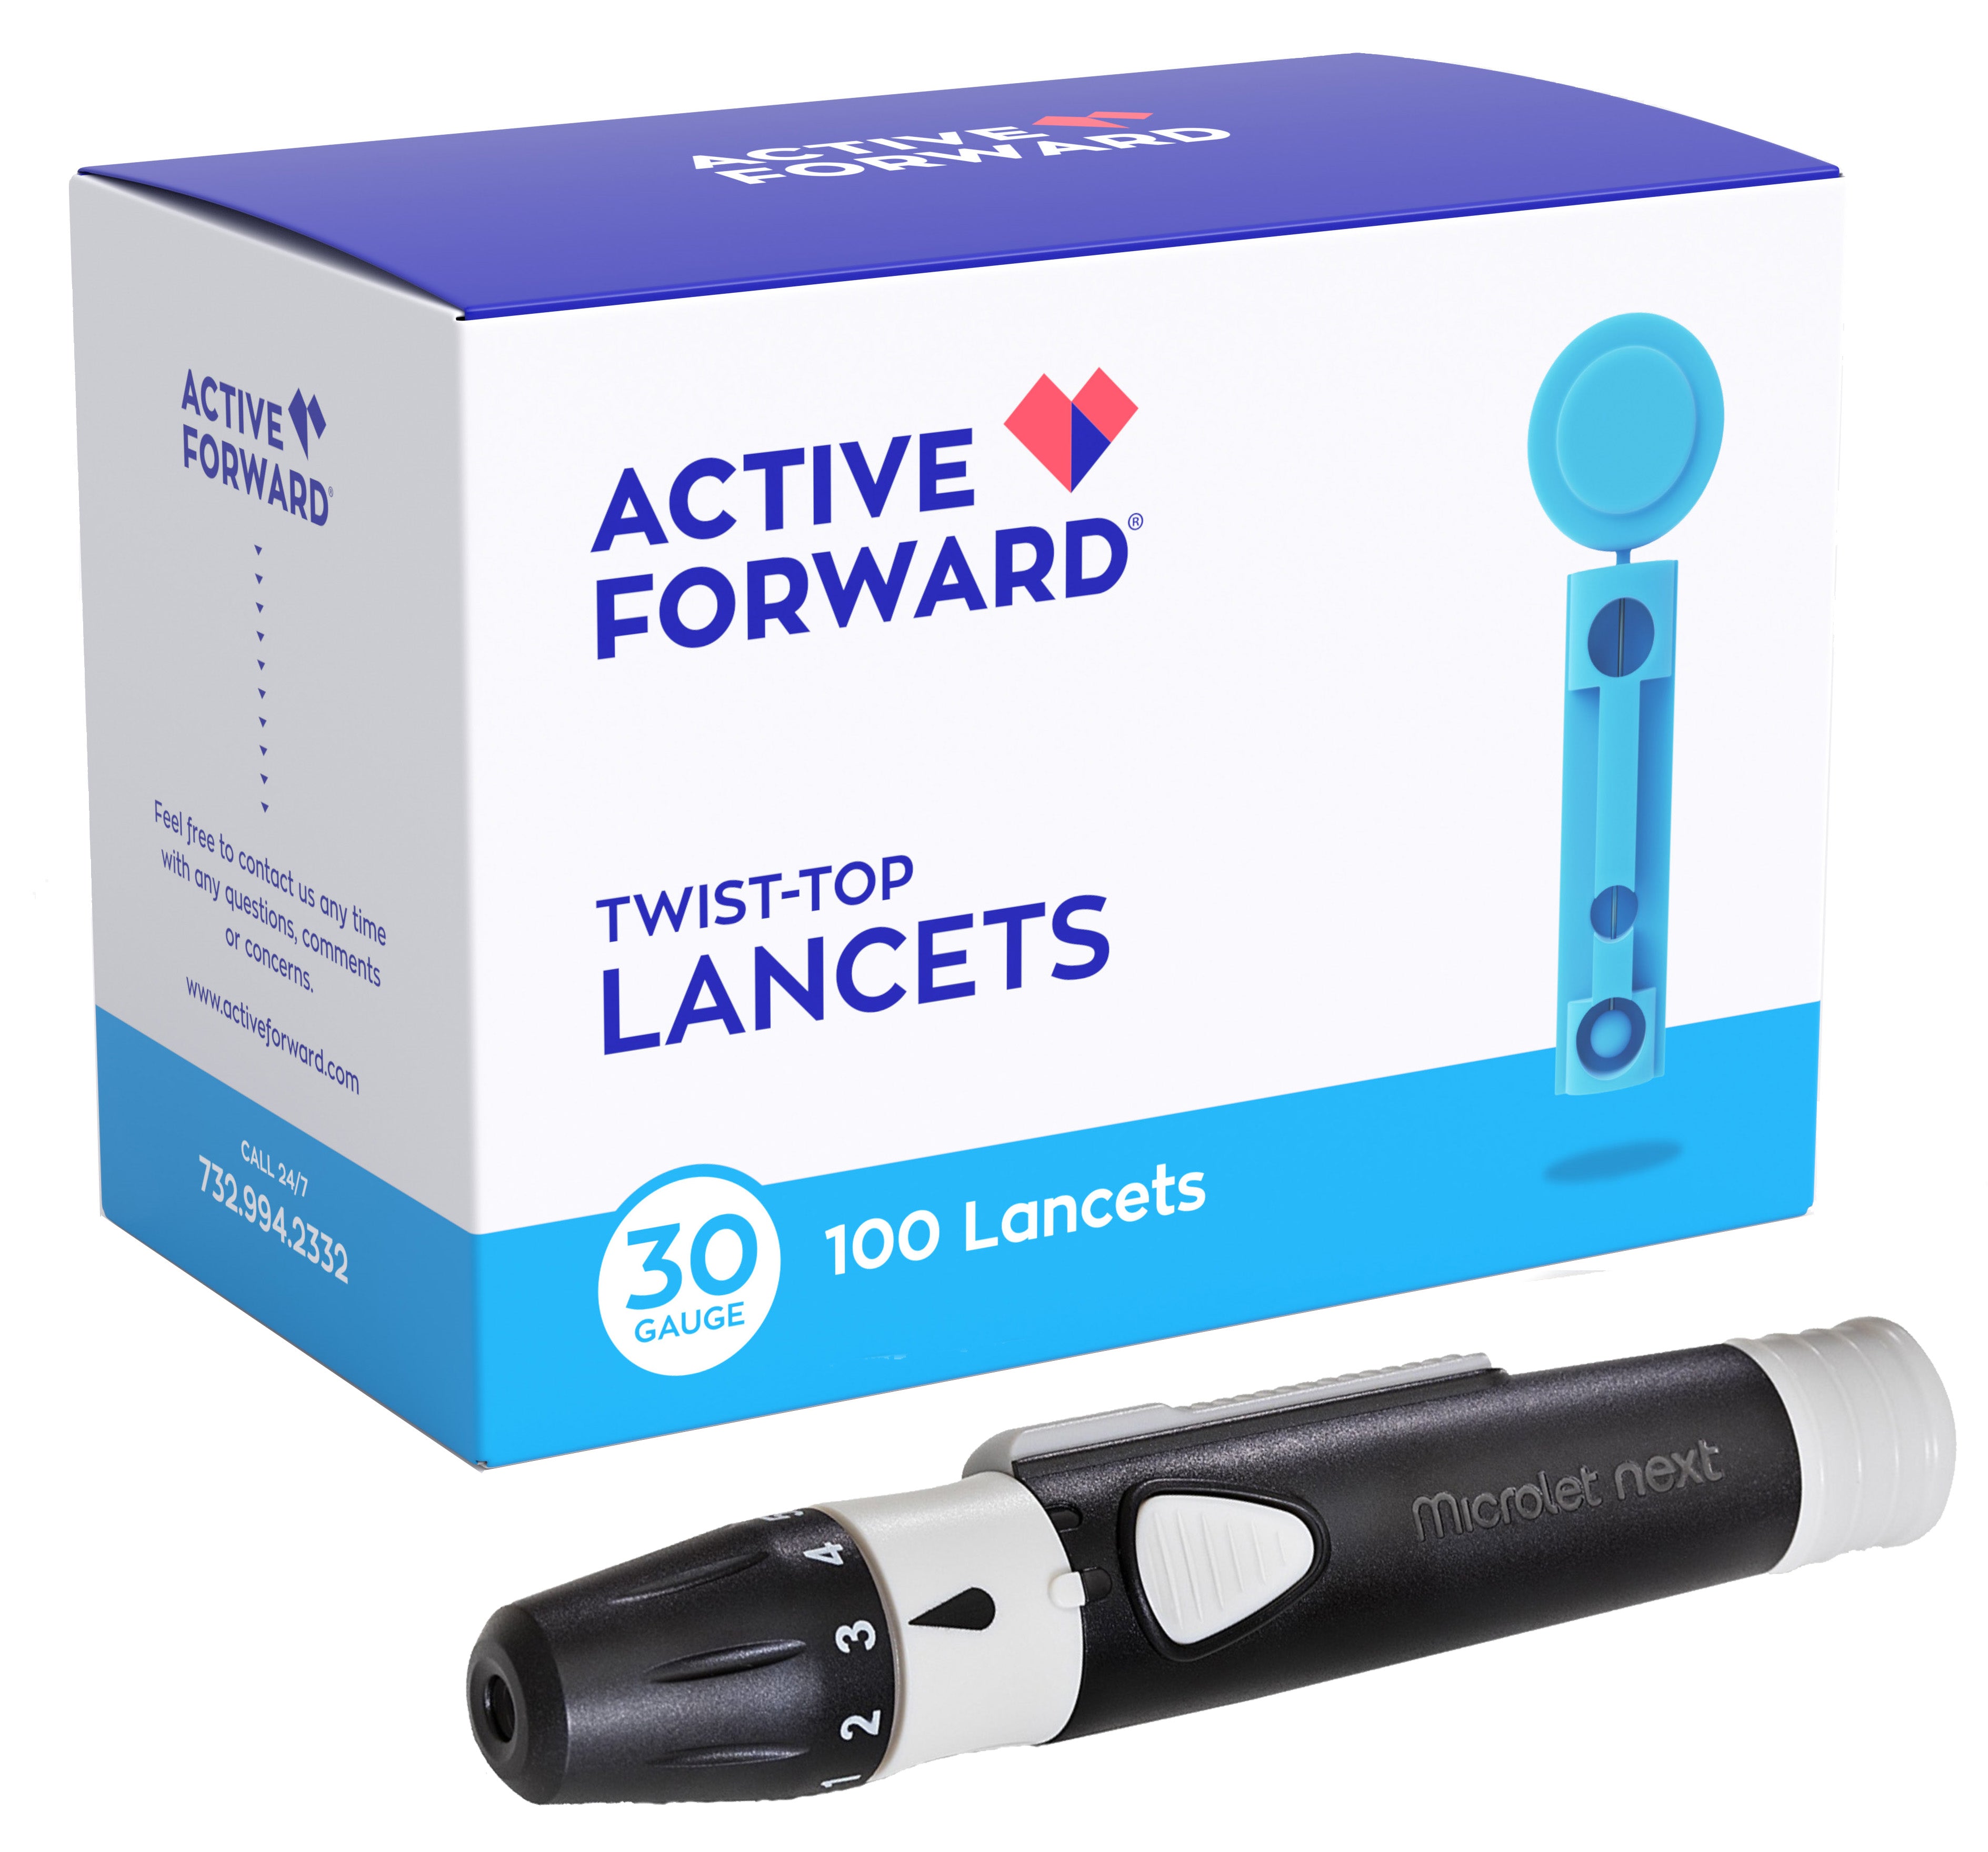 Microlet Lancing Device + 100 Active Forward 30g Lancets